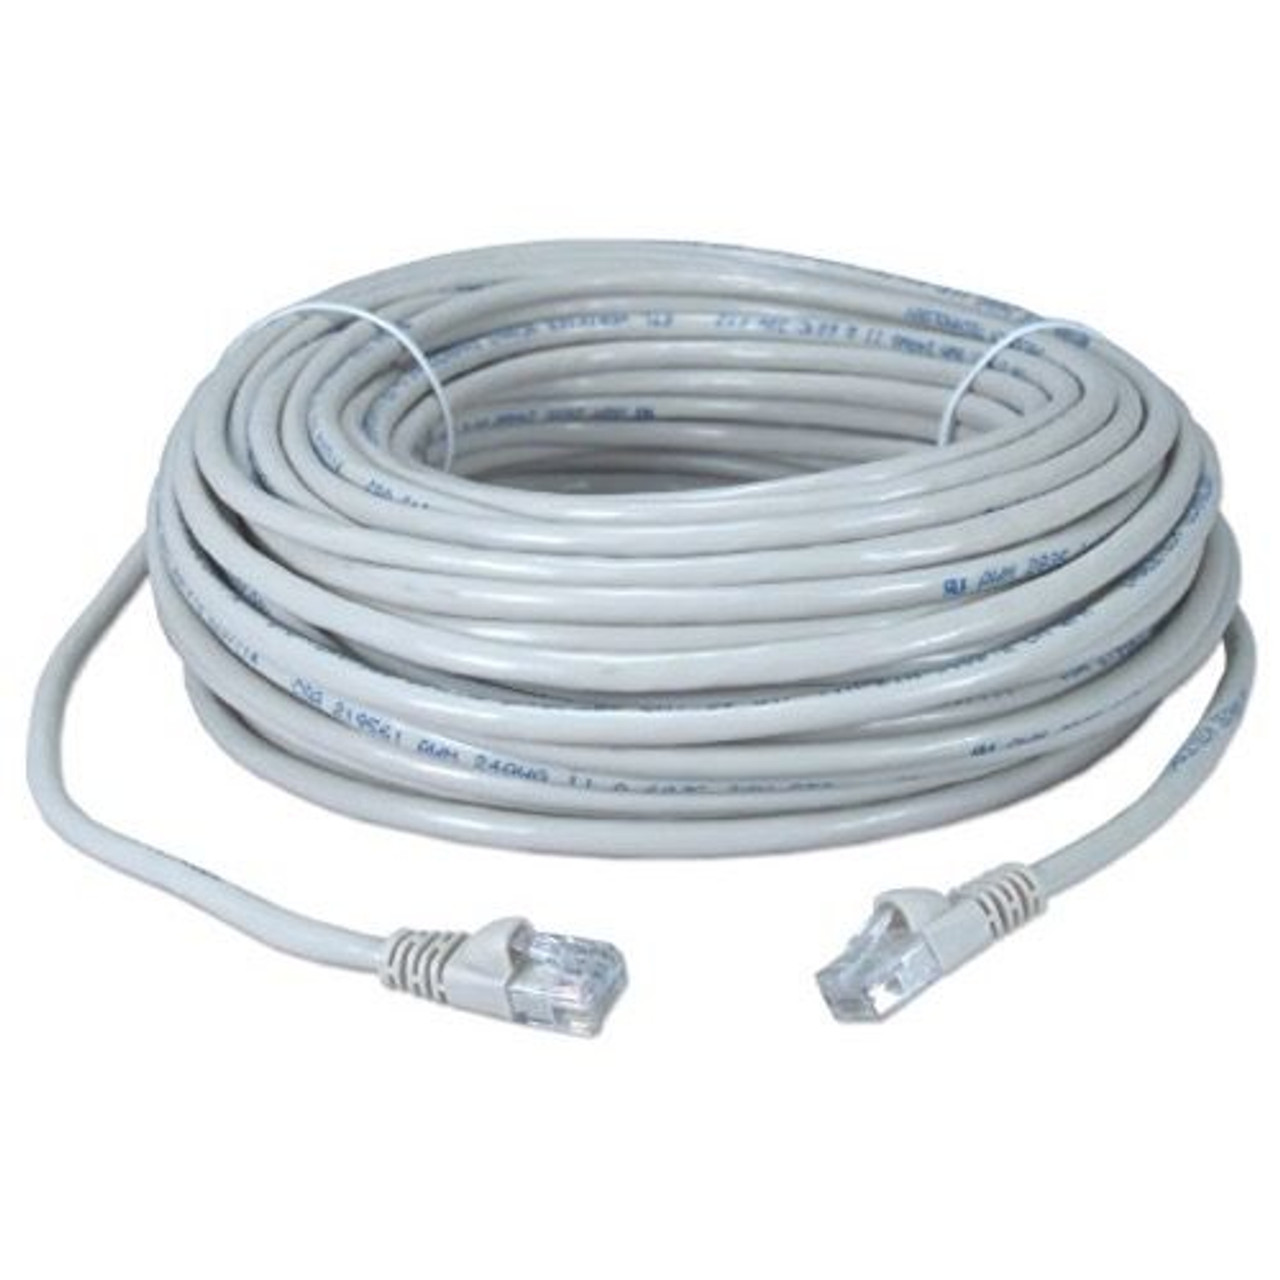 Steren 308-625WH 25' FT White CAT5E Cable Patch Cord Snagless UTP RJ45 Connector Each End Lan Network Gold Plated 100% Tested 24 AWG Copper Stranded Male to Male Enhanced Category 5e High Speed Ethernet Data Computer Gaming Jumper, Part # 308625-WH